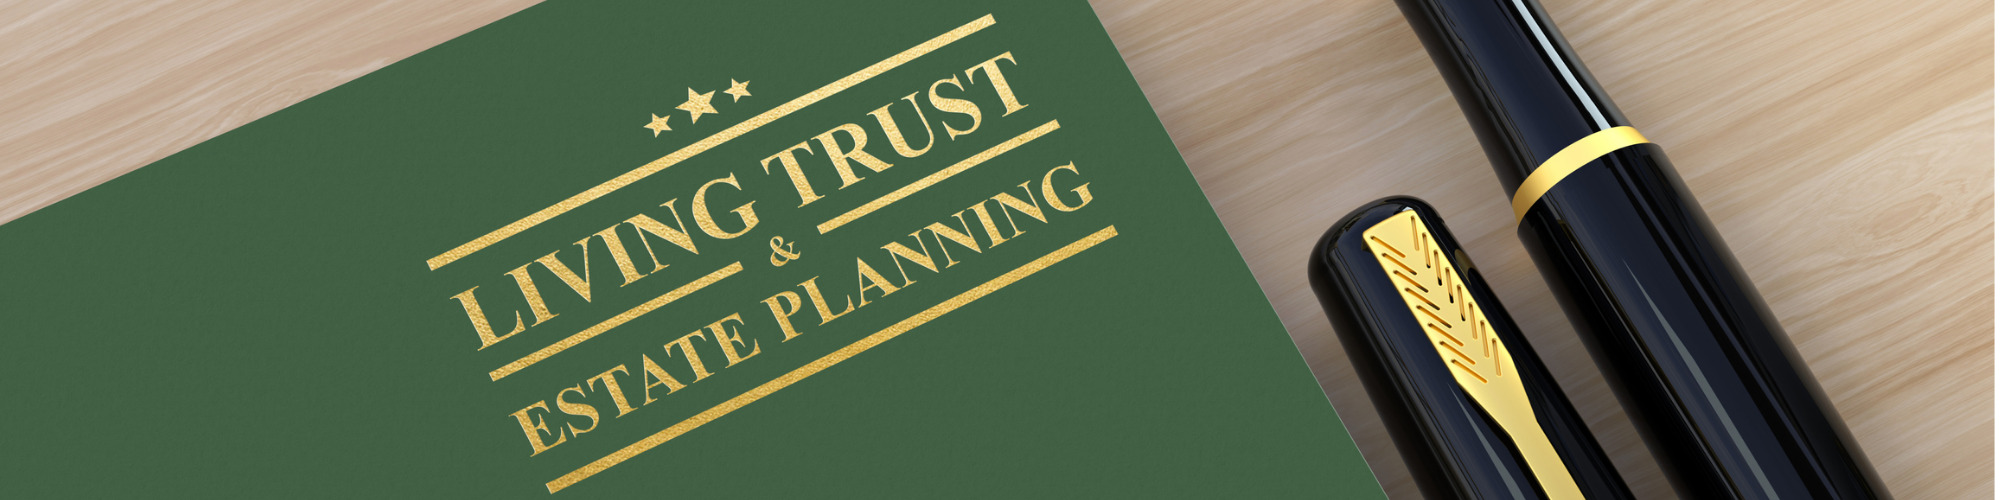 Getting to Grips with Express, Resulting & Constructive Trusts - A One Hour Guide